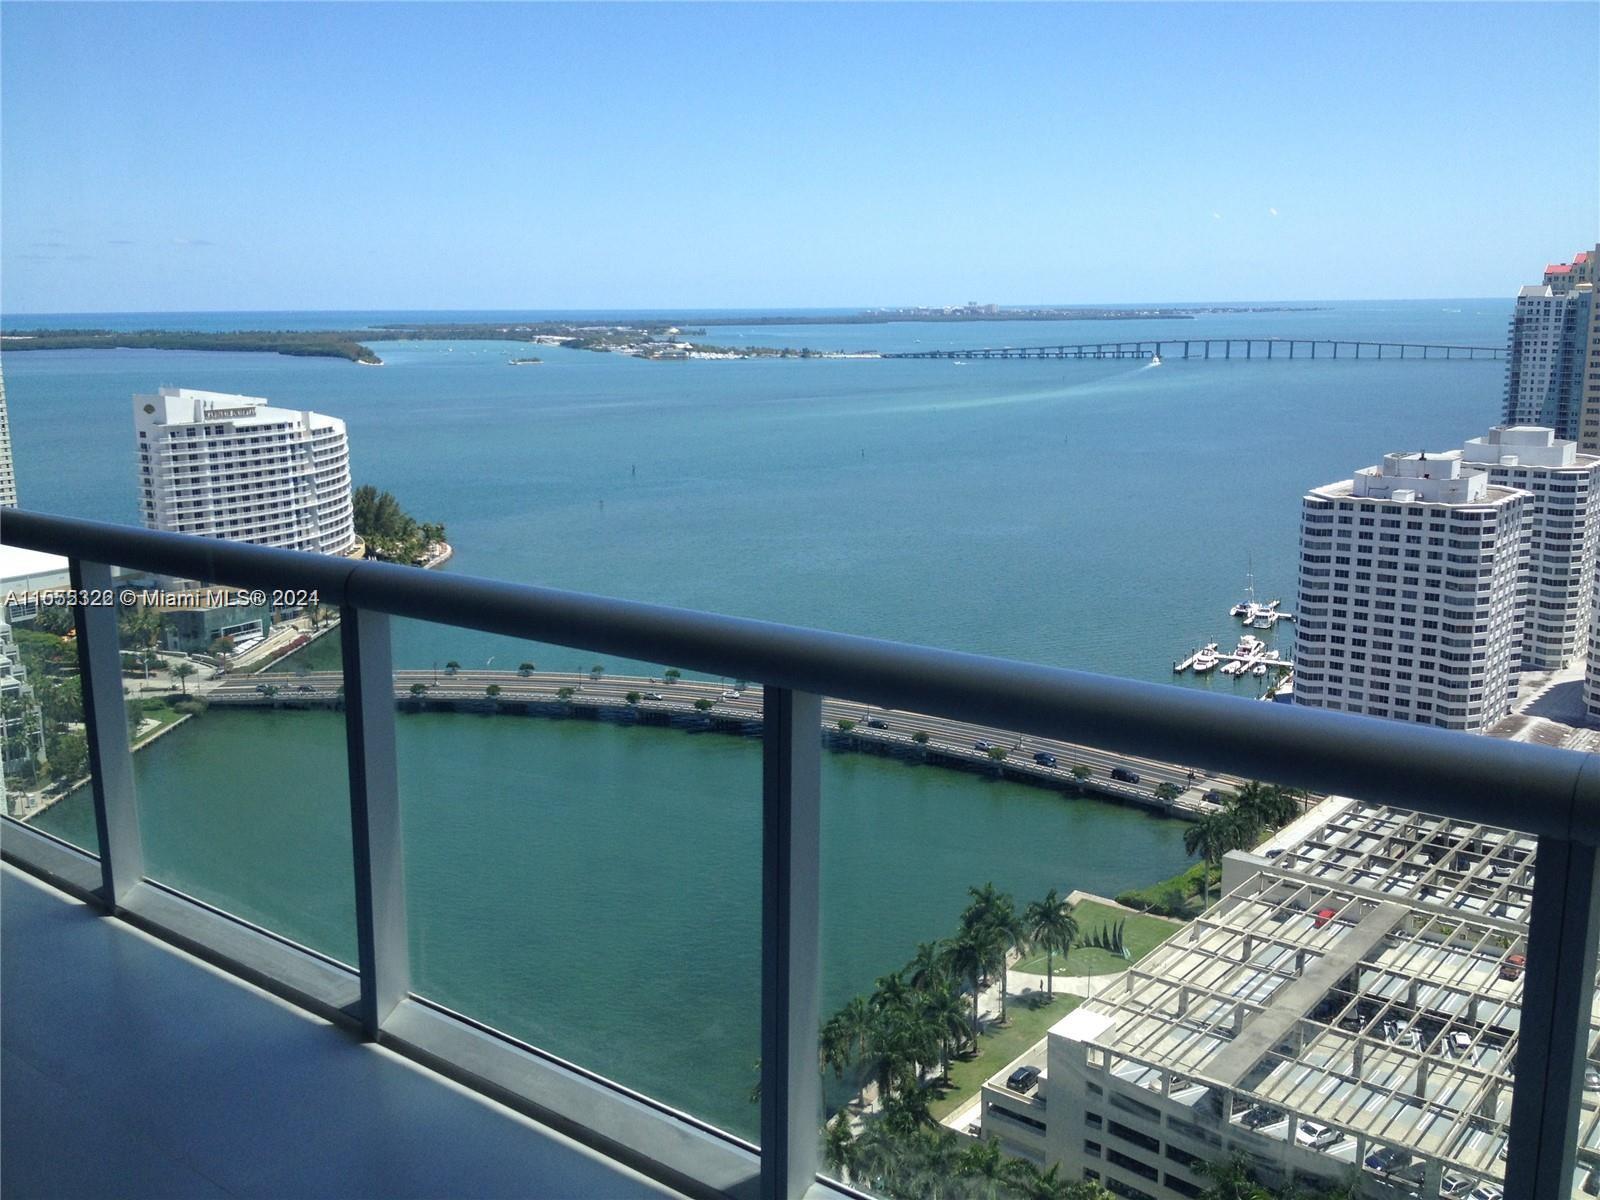 Owner motivated!!! Breathtaking view of Biscayne Bay from one of the largest 1bedrooms at Icon Brickell. Great layout, marble floors throughout the unit and balcony, high-end appliances and open kitchen. Building has amazing amenities including the biggest pool area with huge infinity pool surrounded by cabanas, hot tubs, gym, yoga room, spinning room, , top quality restaurants and bars, luxurious full-service SPA, state-of-the-art fitness center, fitness and yoga classes and personal trainer available, movie theater, billiard room, 24-7 concierge, valet parking, and more. This building is located in the heart of Brickell and walking distance to many famous restaurants and Brickell City Center mall. Unit rented until November, tenant paying $4,100 monthly.